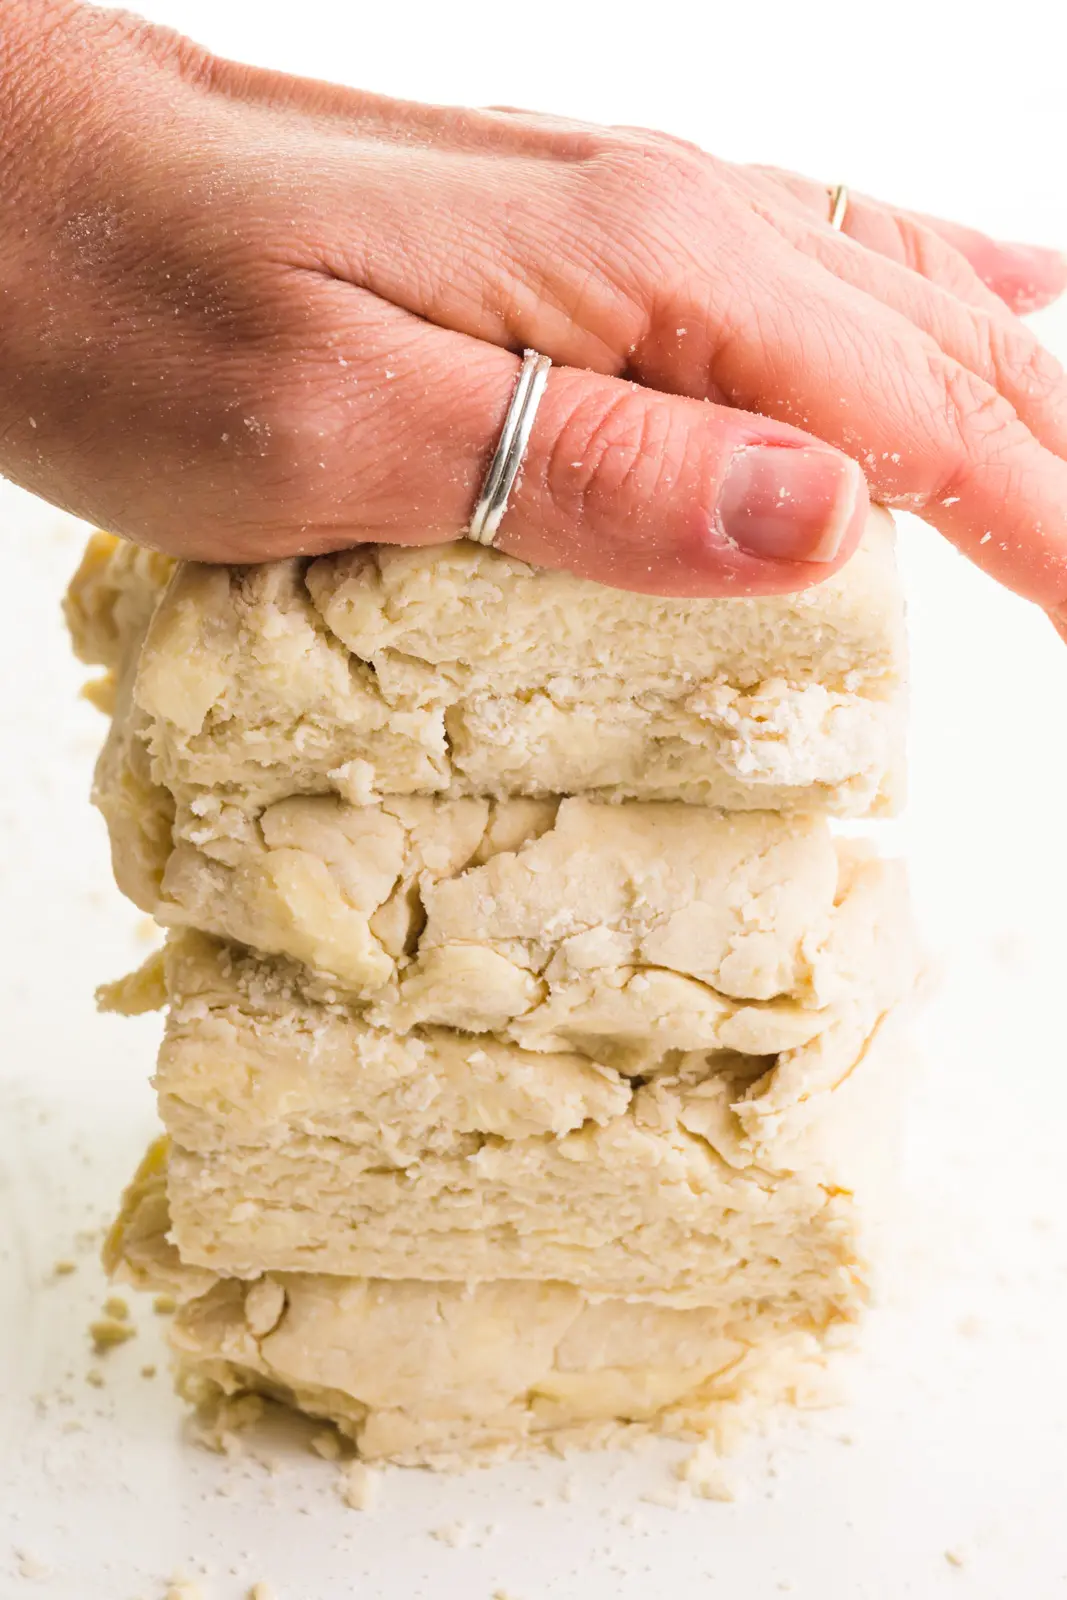 A hand pressed down on a stack biscuit dough.